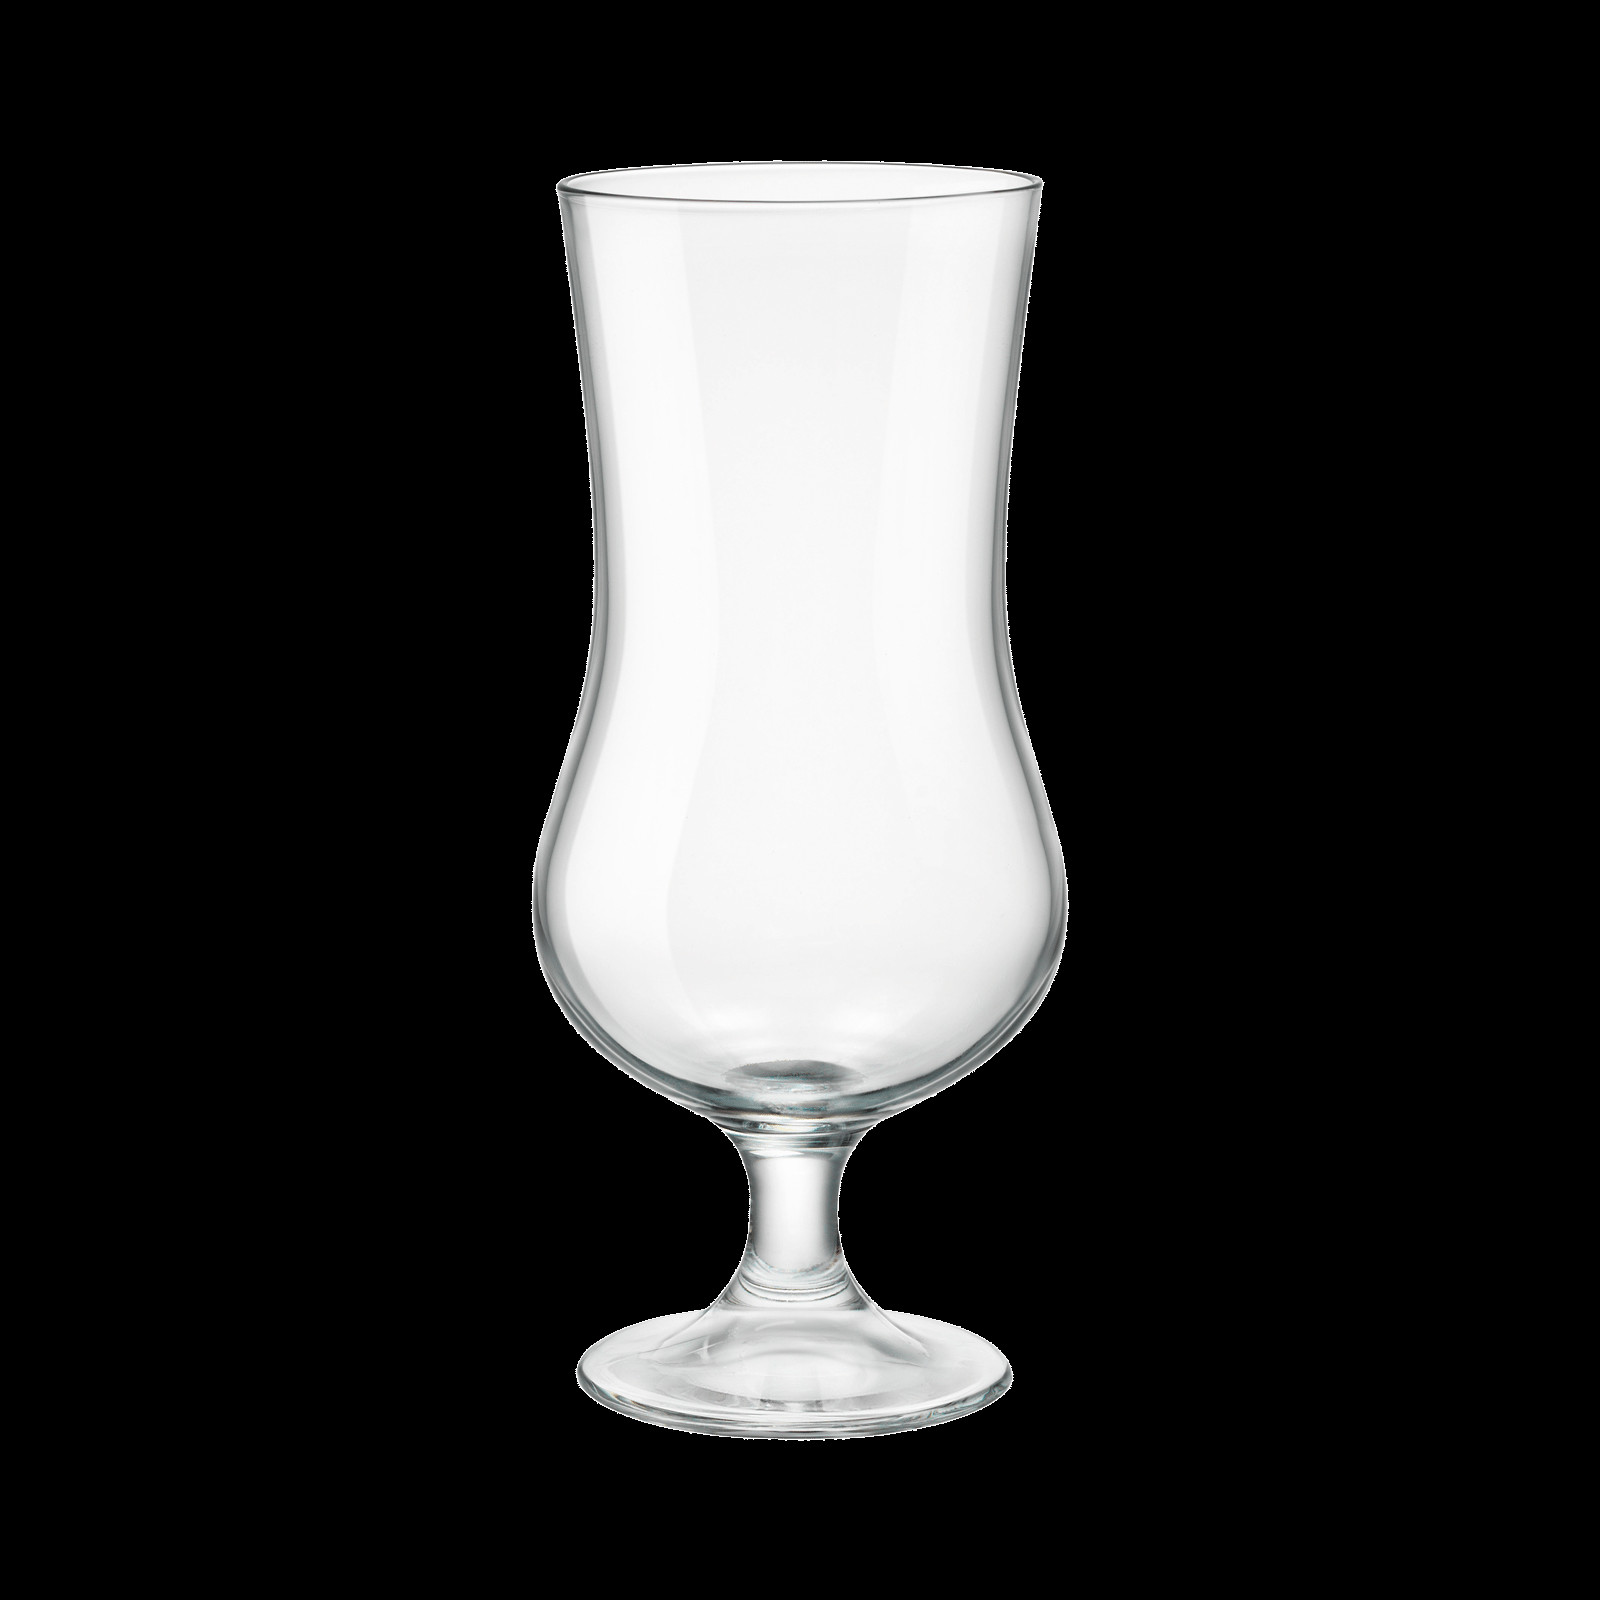 17 Awesome Large Glass Vase with Lid 2024 free download large glass vase with lid of archivi products bormioli rocco with regard to large beer glass